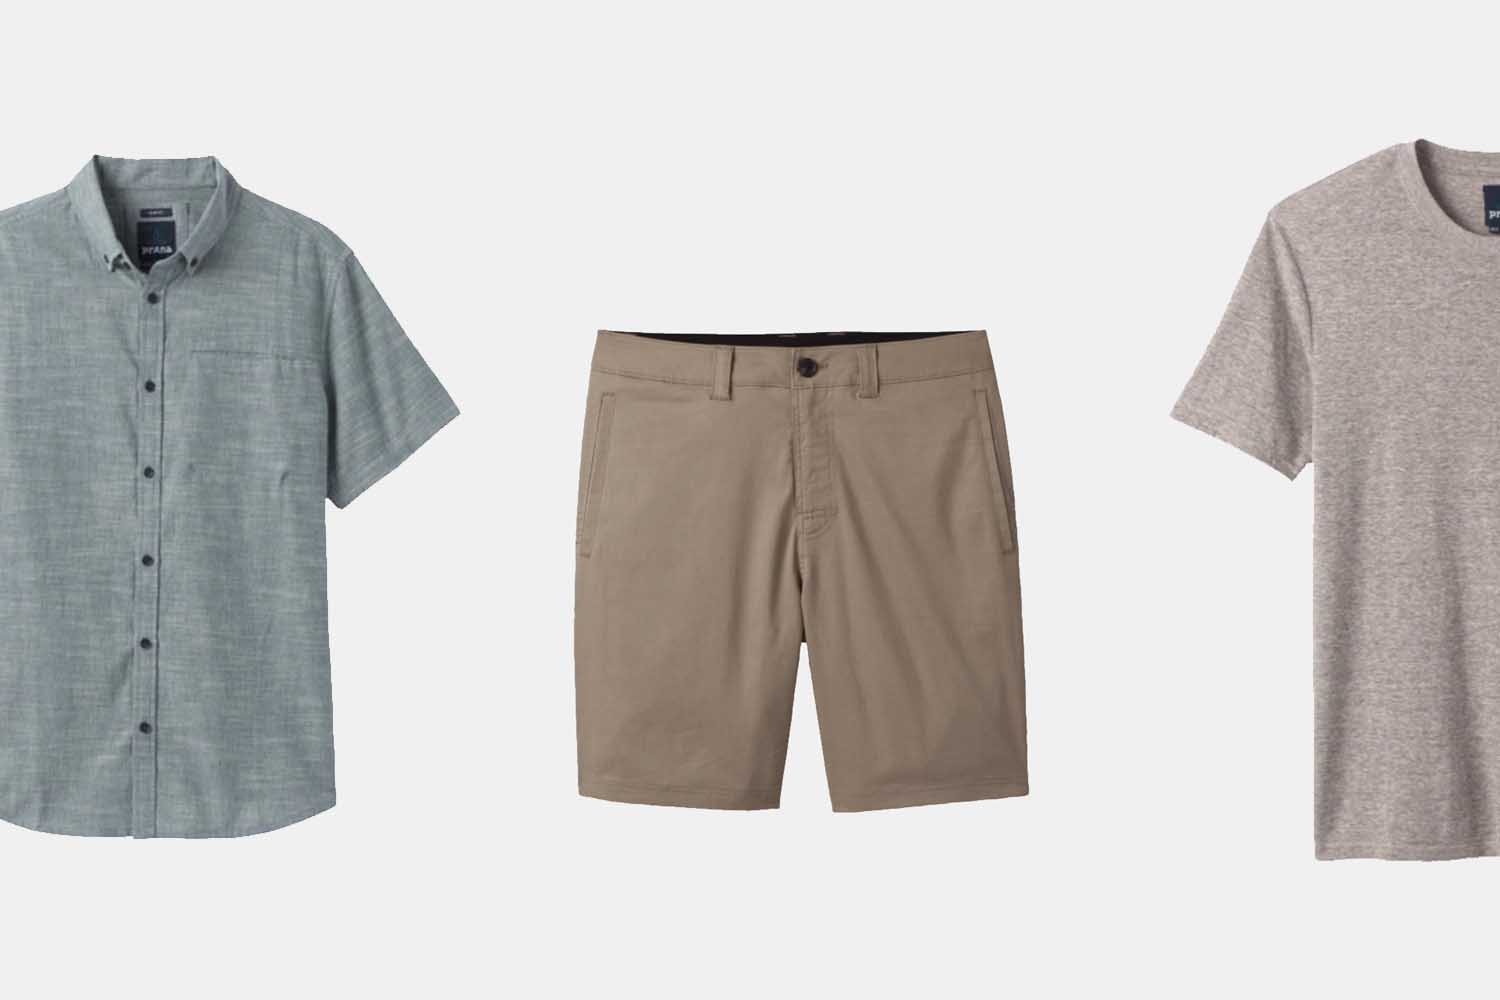 Save Up to 50% During PrAna's End-of-Season Sale